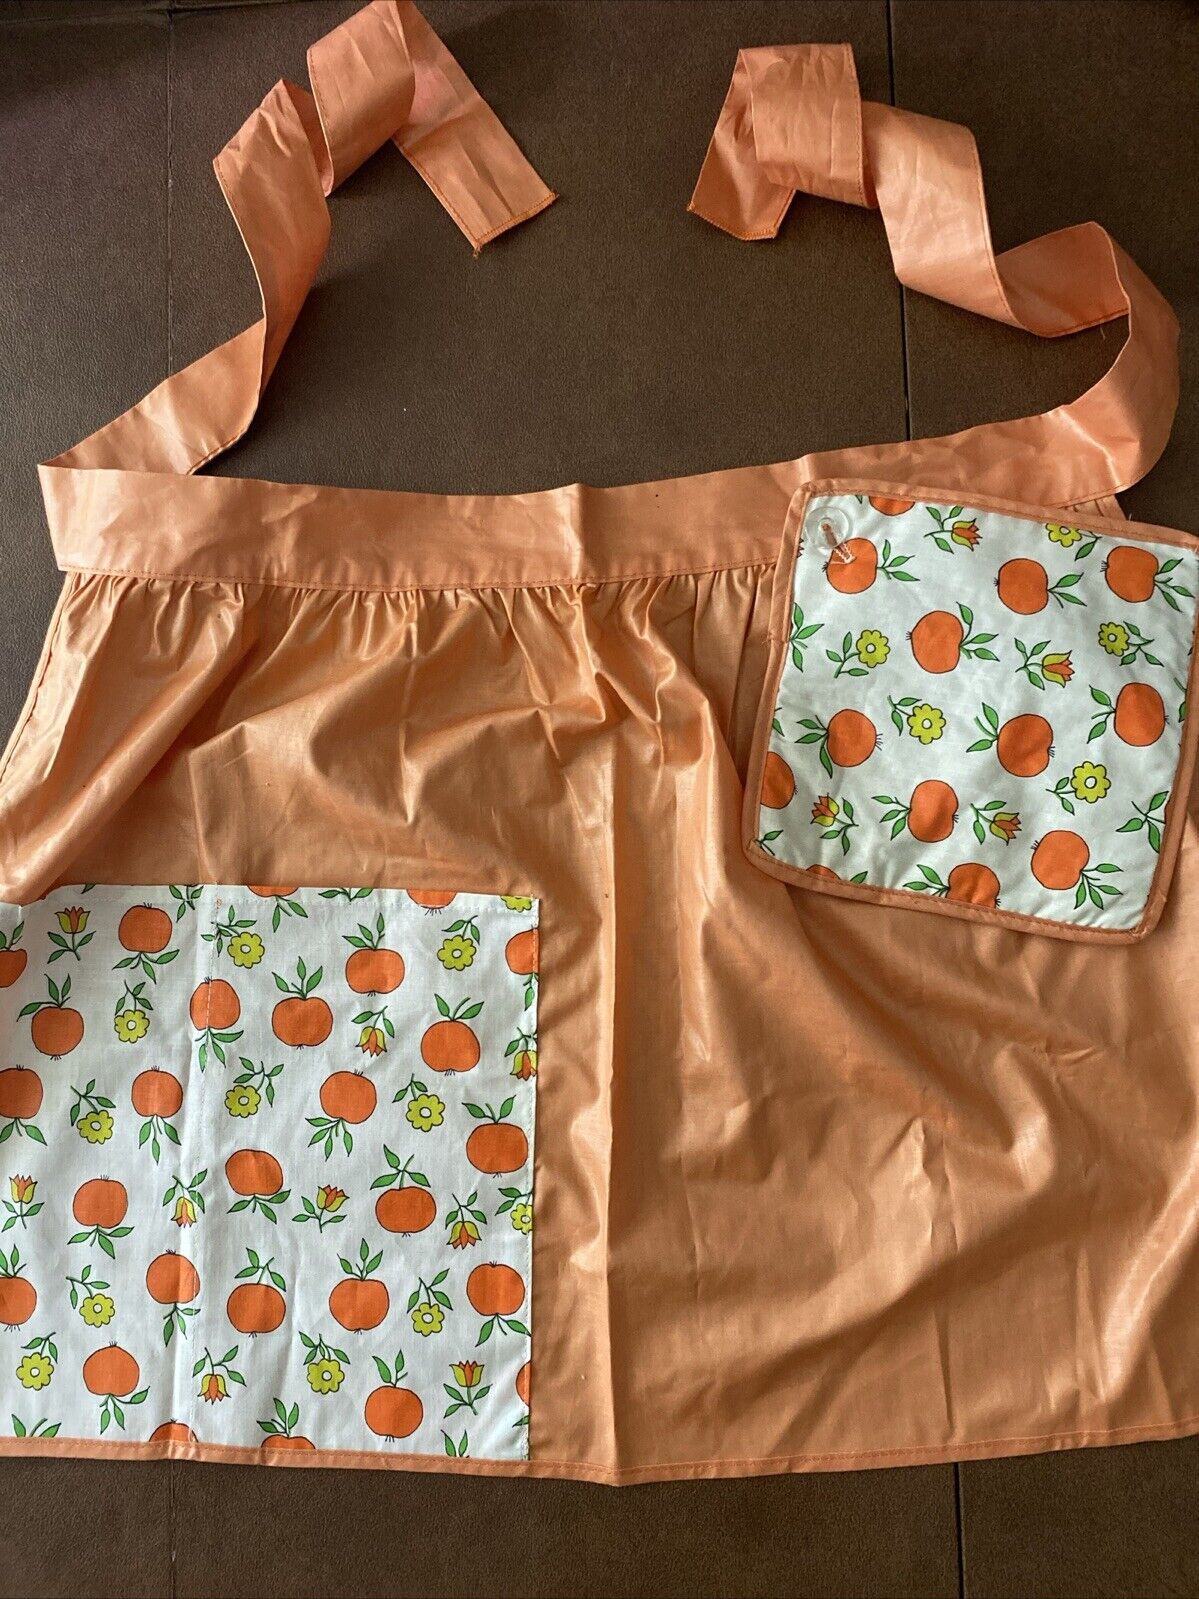 Vintage 70s Orange Cotton Apron Fruit/Flower Accents And Potholder Made In USA